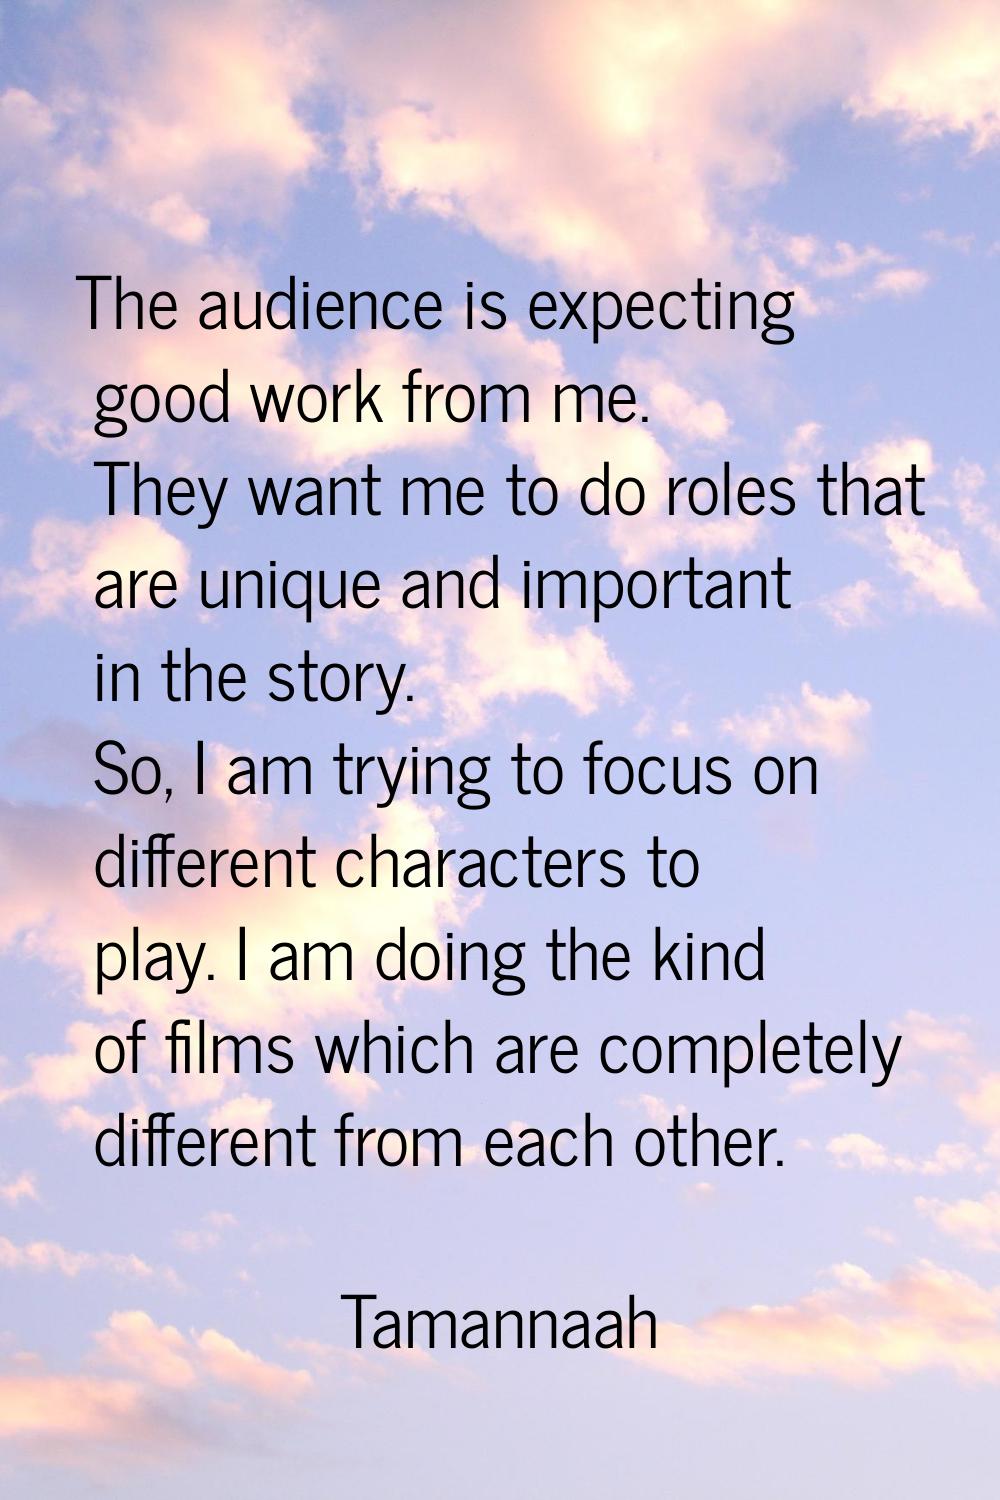 The audience is expecting good work from me. They want me to do roles that are unique and important